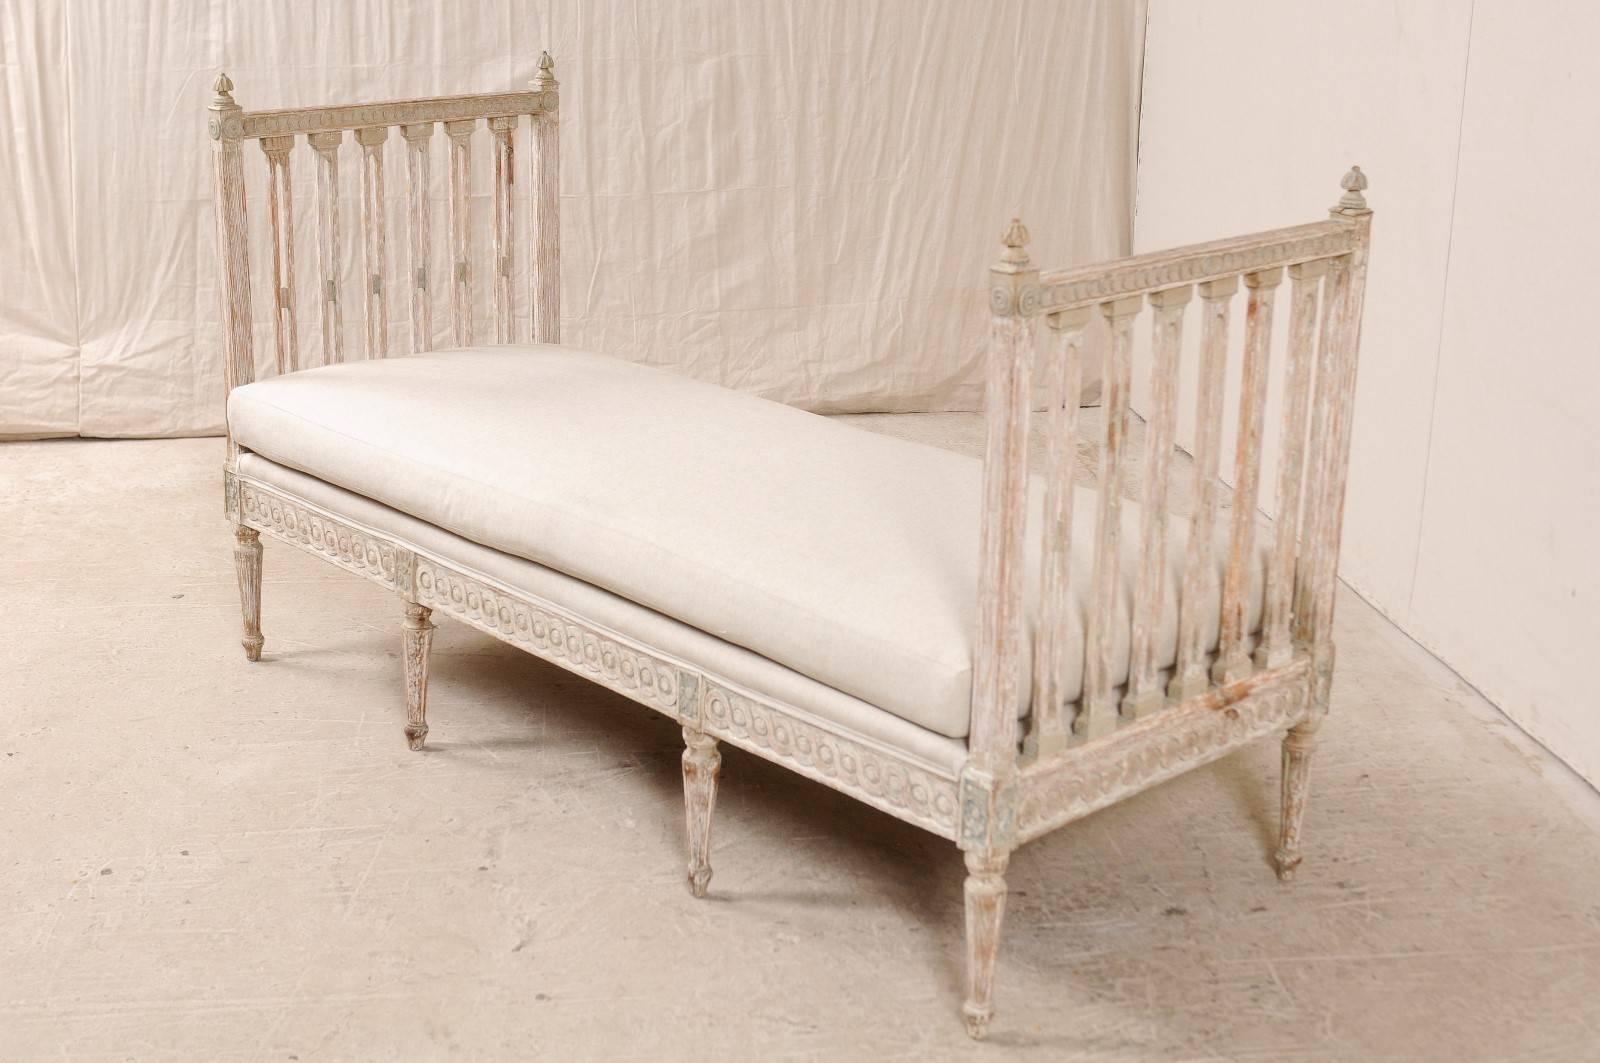 Carved Swedish Period Gustavian Daybed Sofa Bench from the Late 18th Century in Cream